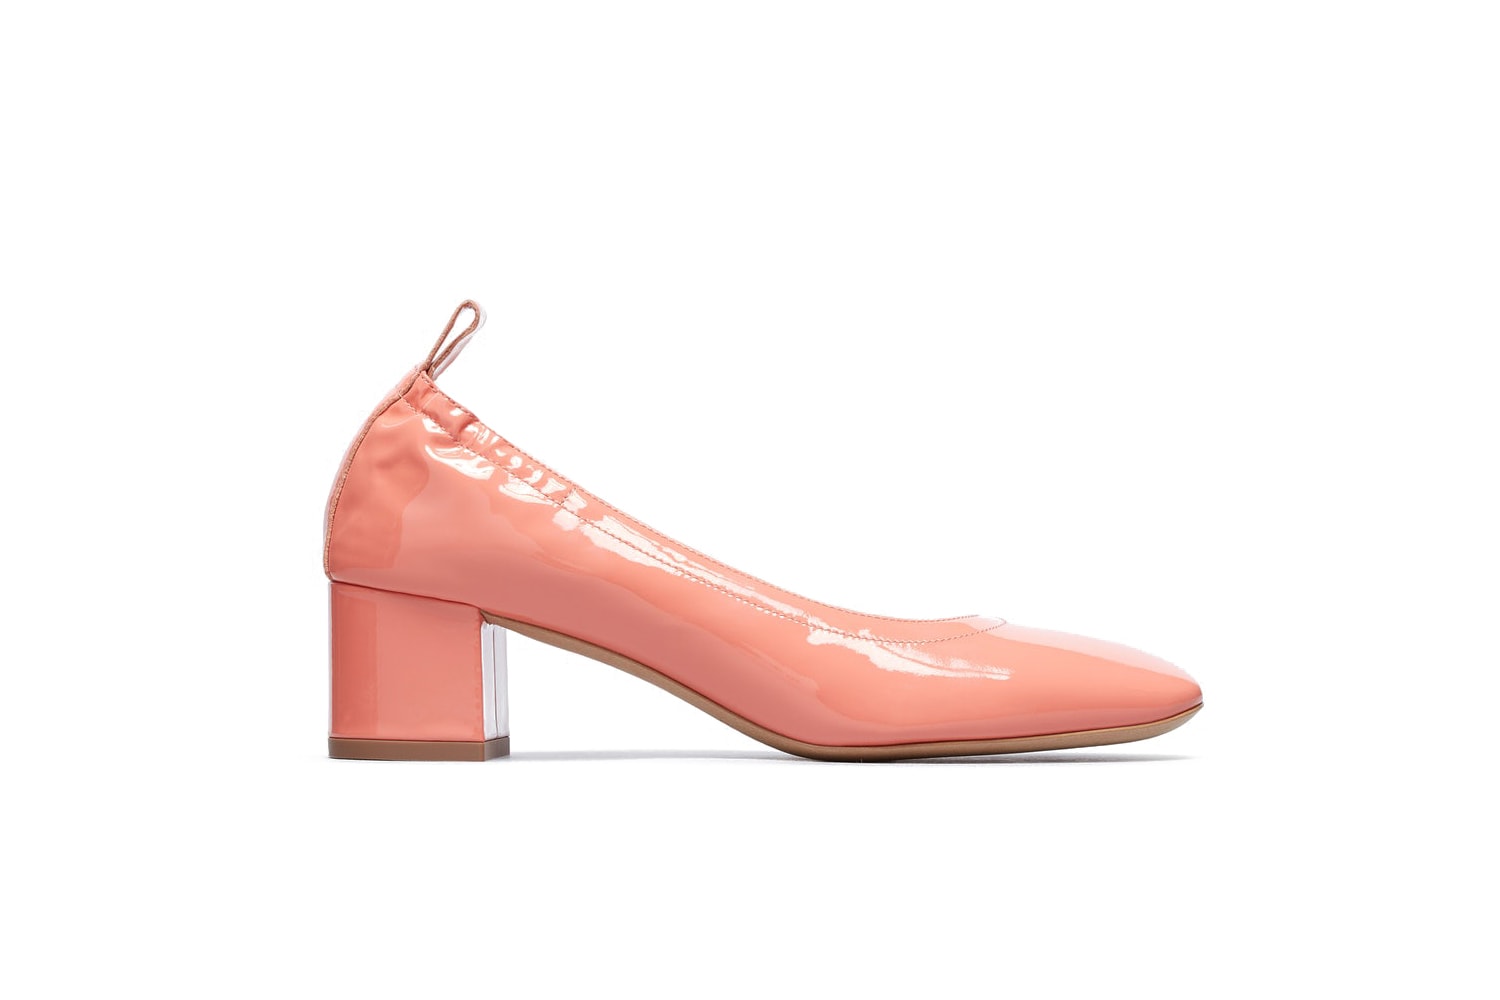 Everlane New Leather/Suede Women's Day Heels Patent Glossy Shine Red Black Pink White Mule